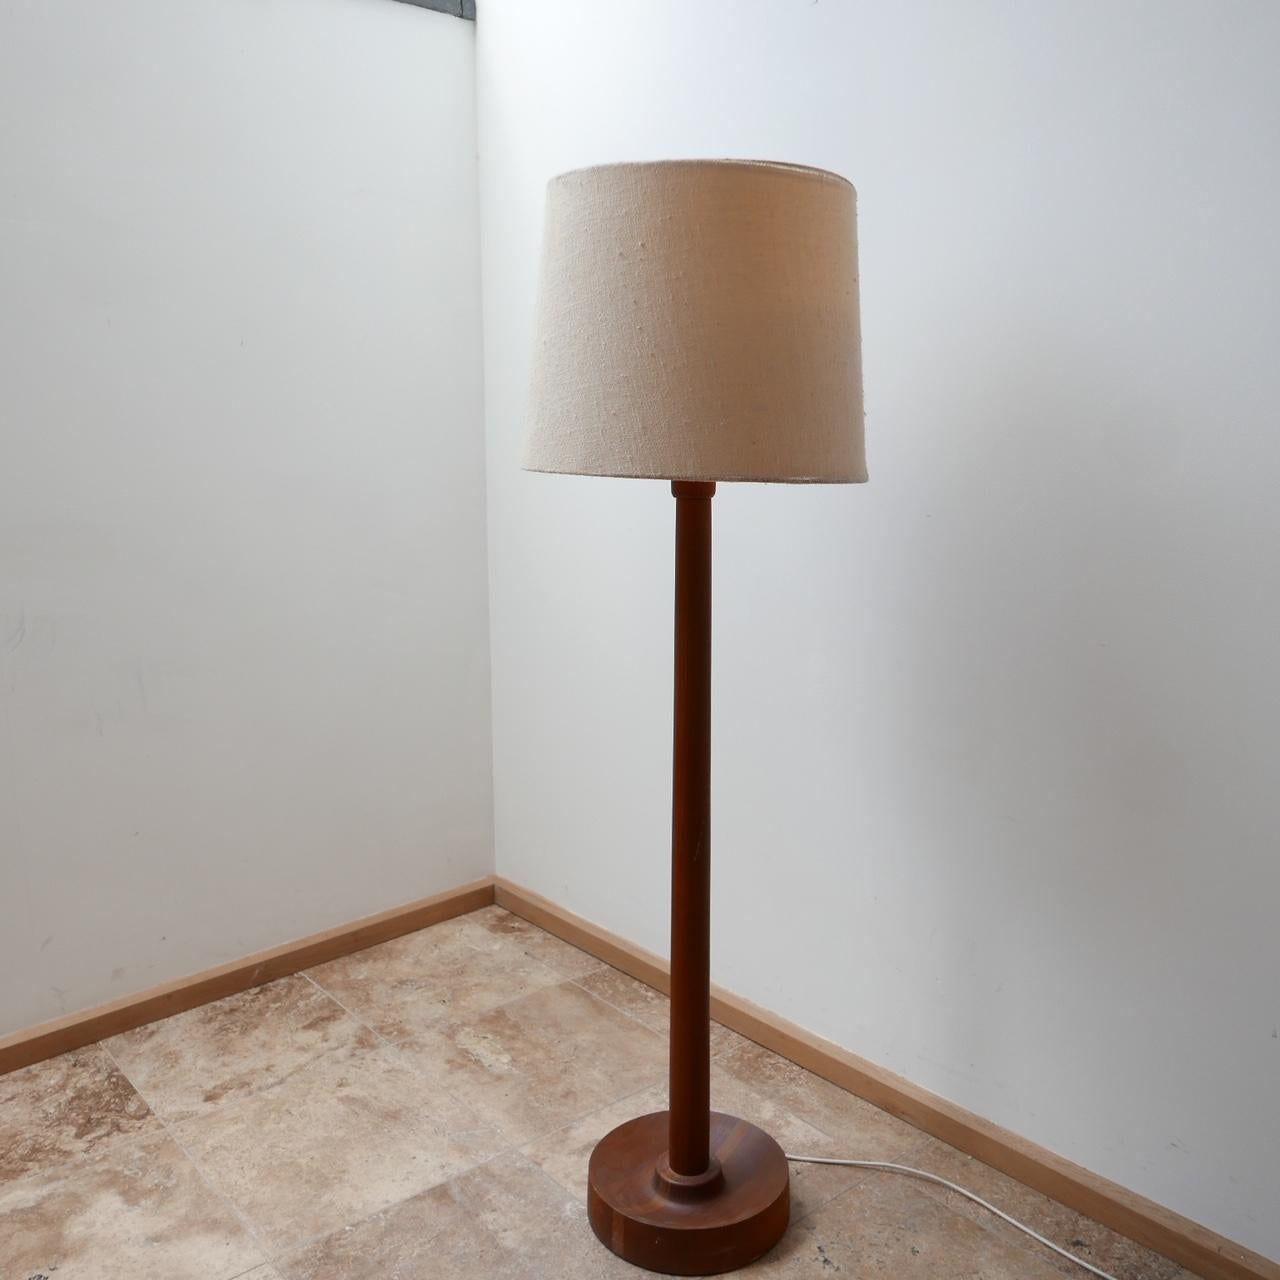 An elegant mid-century teak floor lamp. 

Denmark, c1970s. 

Original shade was retained but there is wear commensurate with age so may want changing. 

Dimensions: 130 height x 31 diameter without shade, 142 height x 45 diameter with shade,